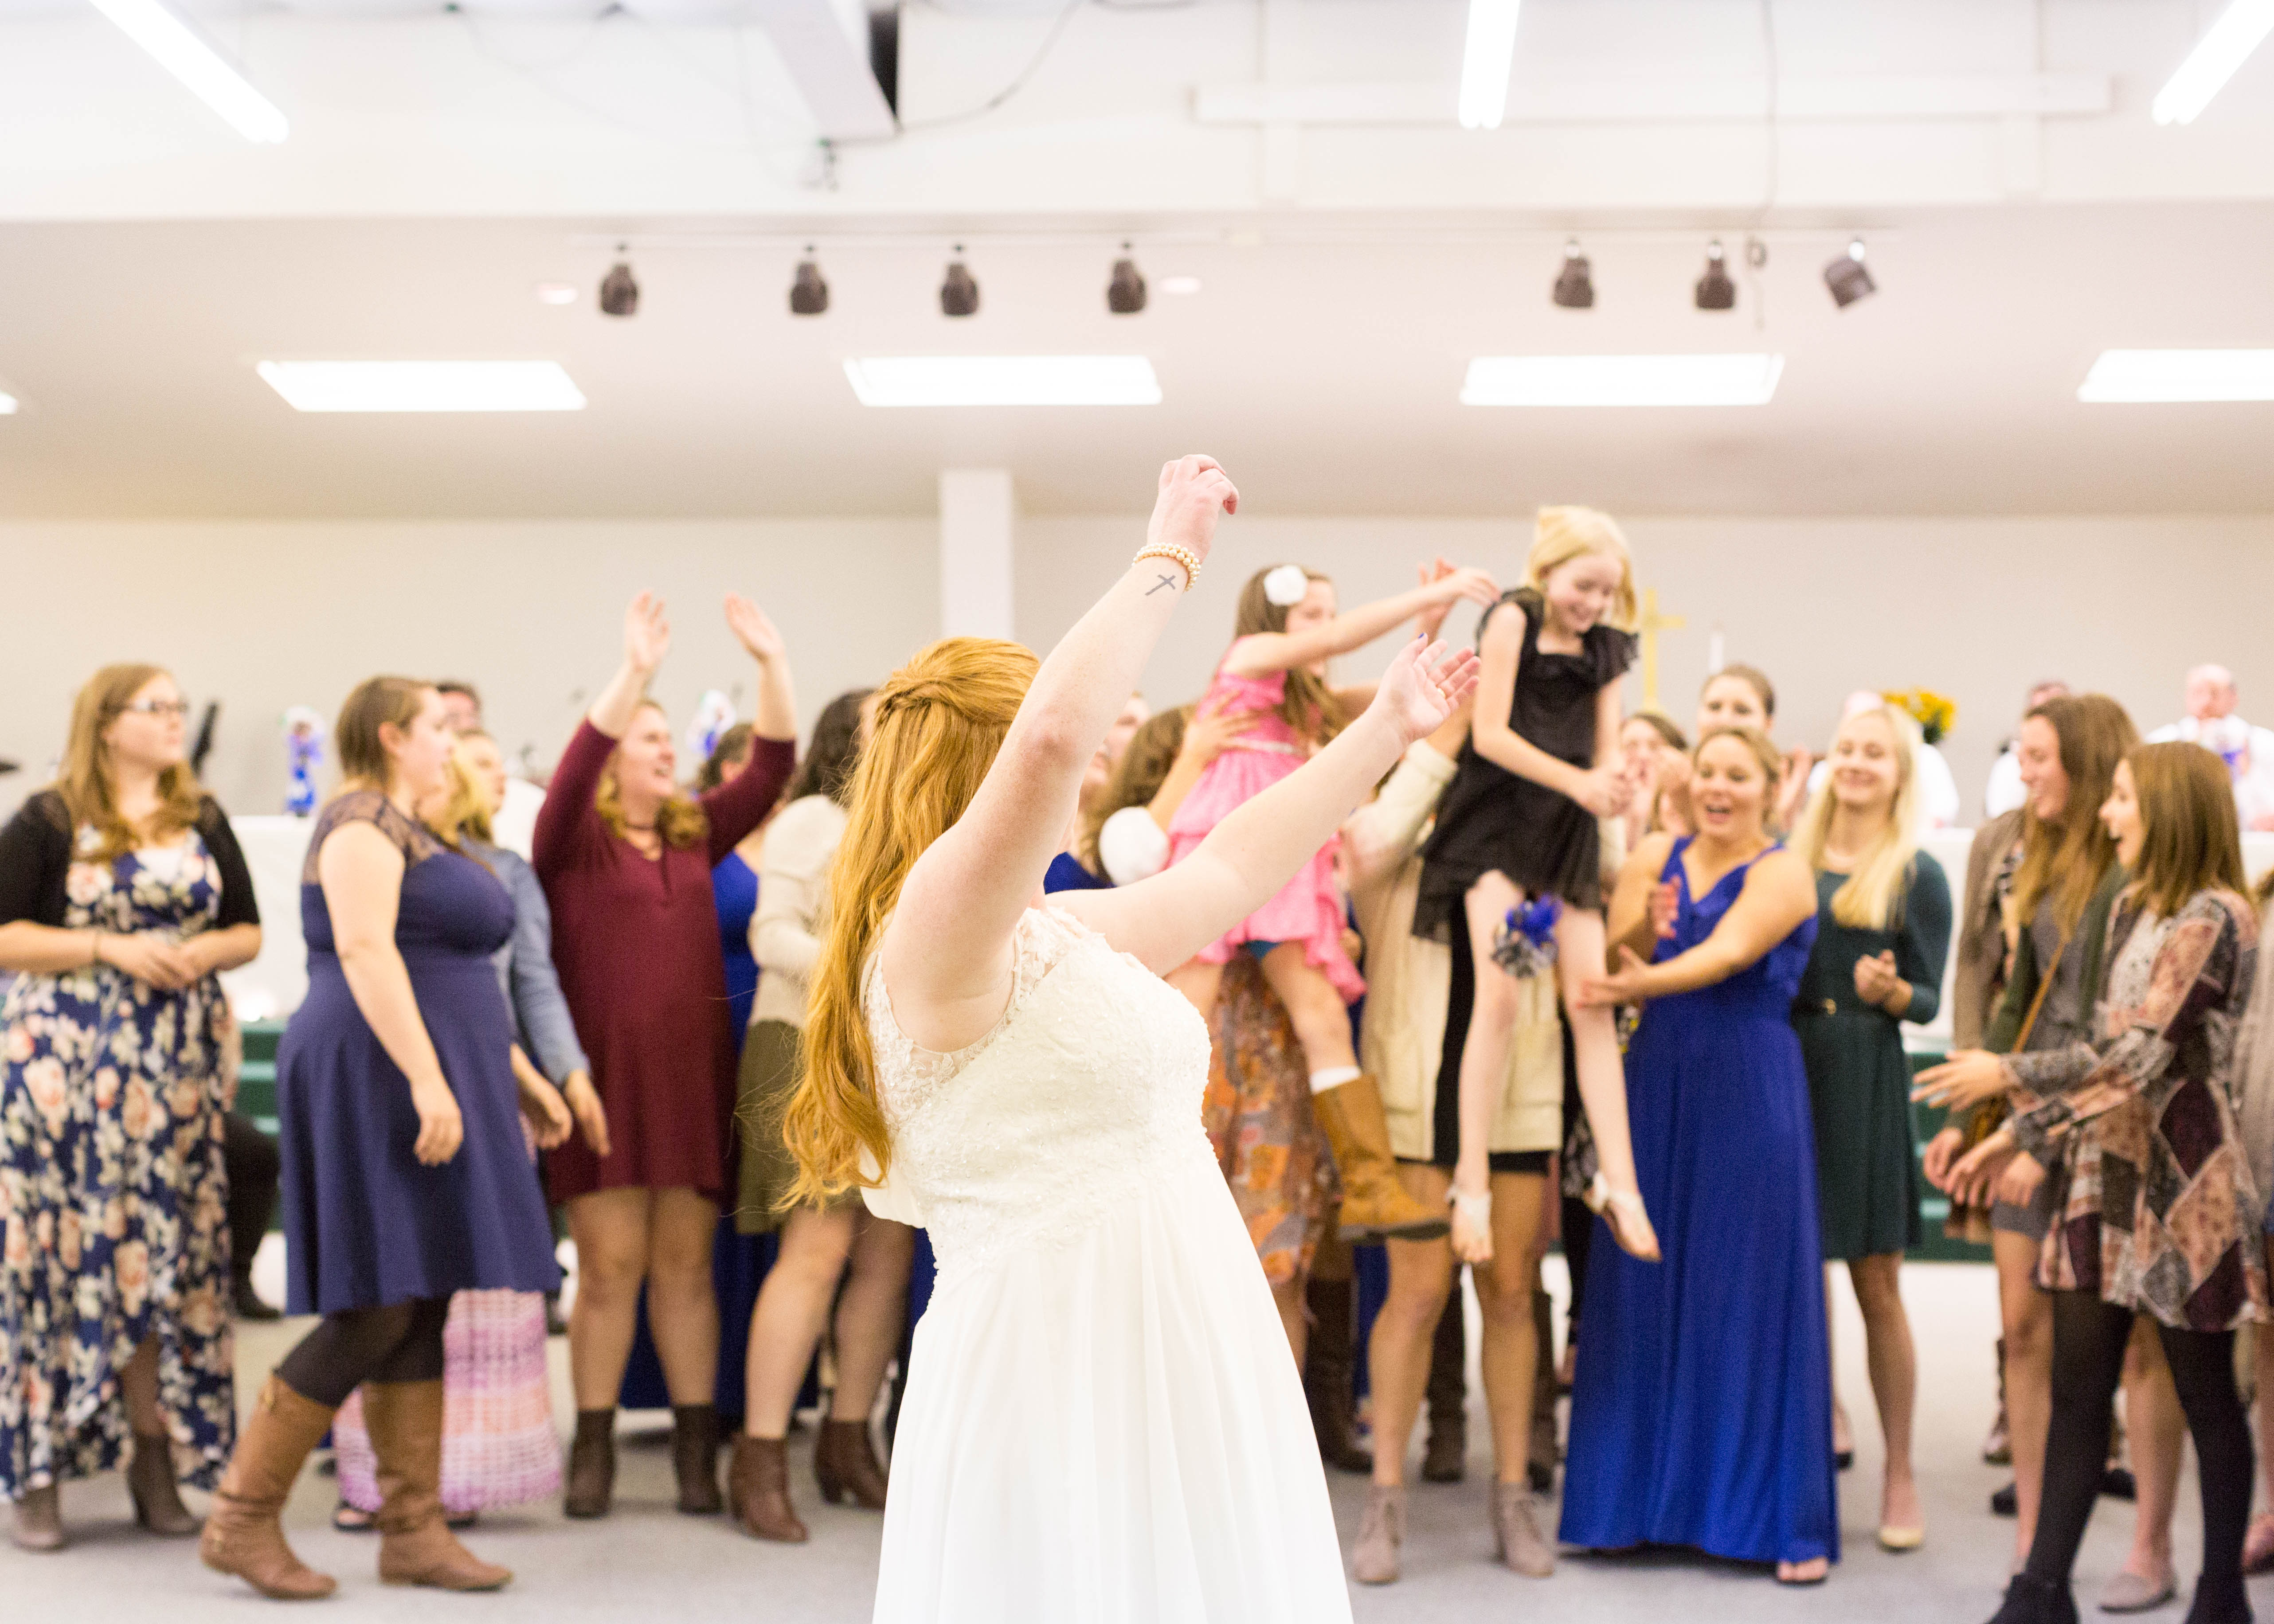 Bride turns to watch the single women catch her bouquet